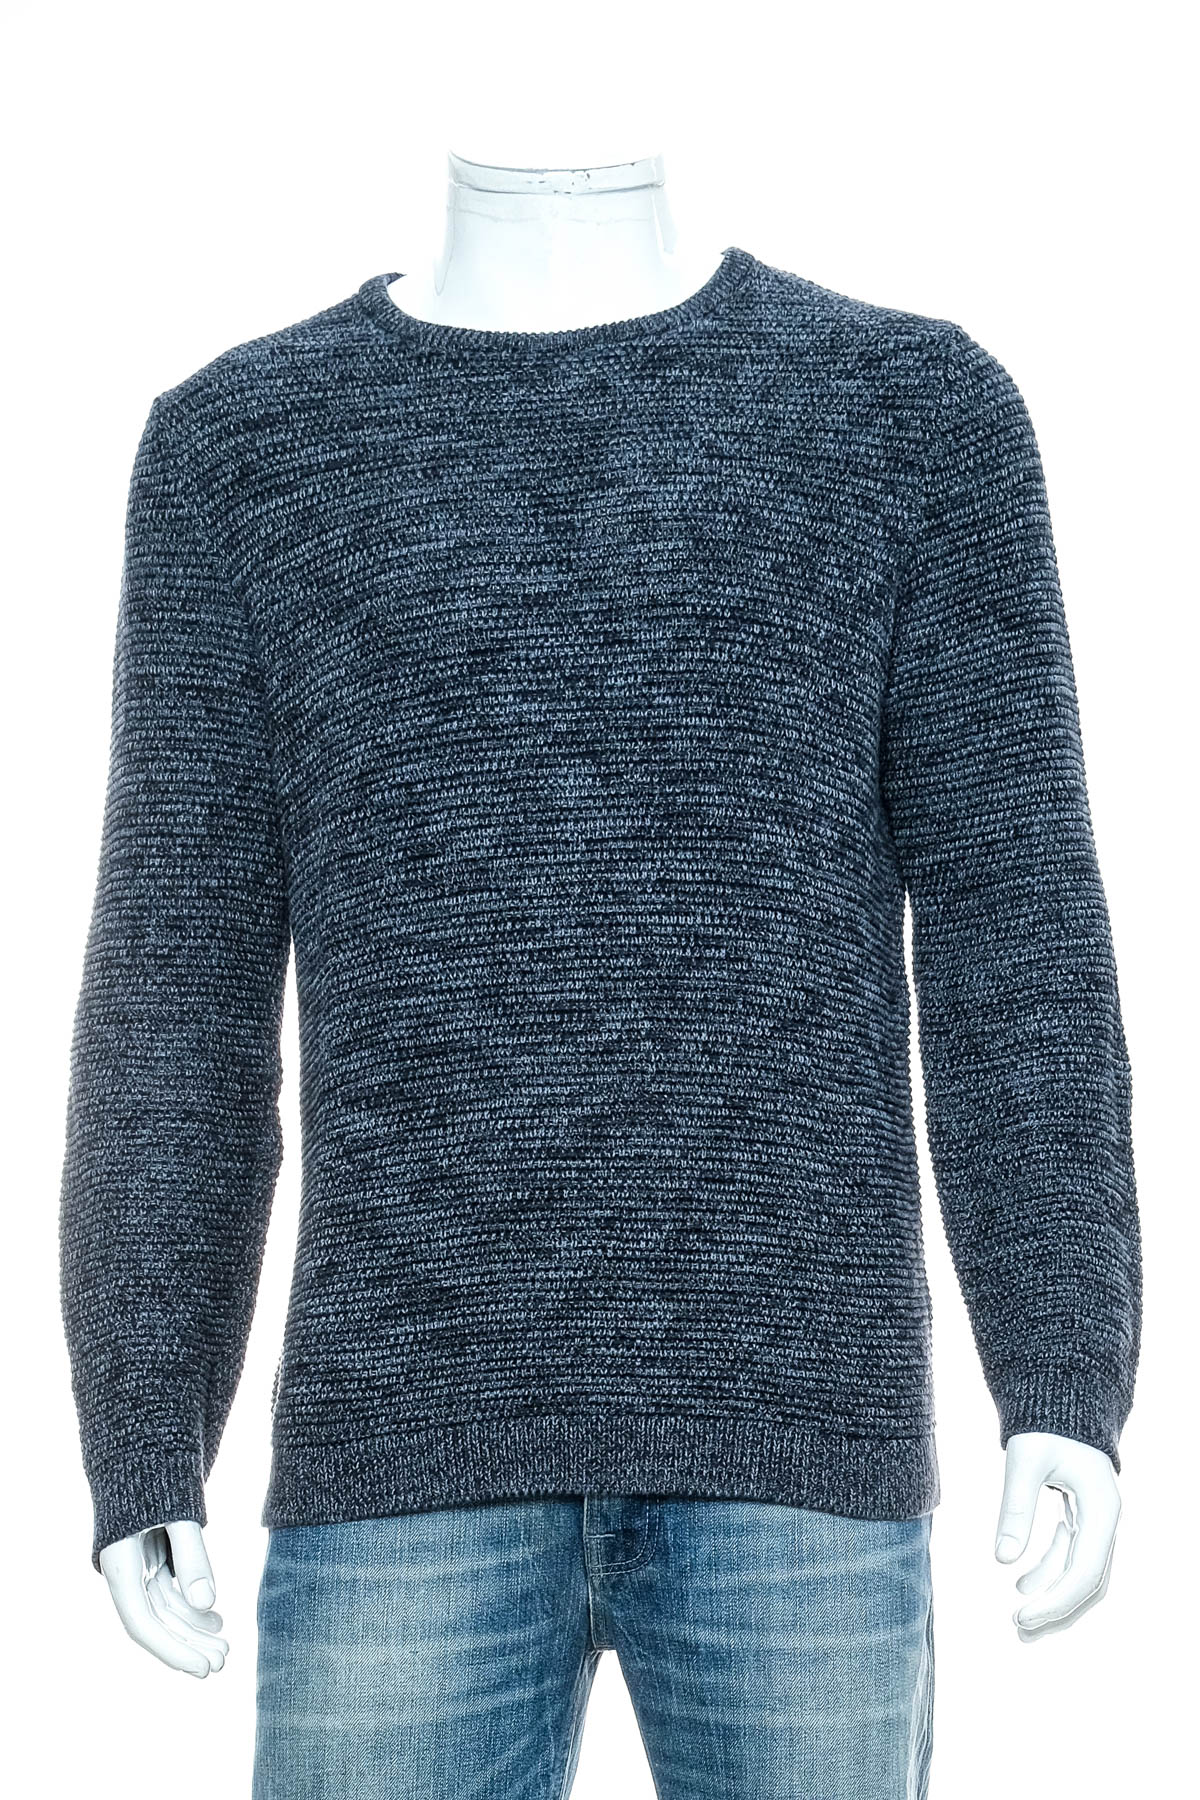 Men's sweater - SELECTED / HOMME - 0